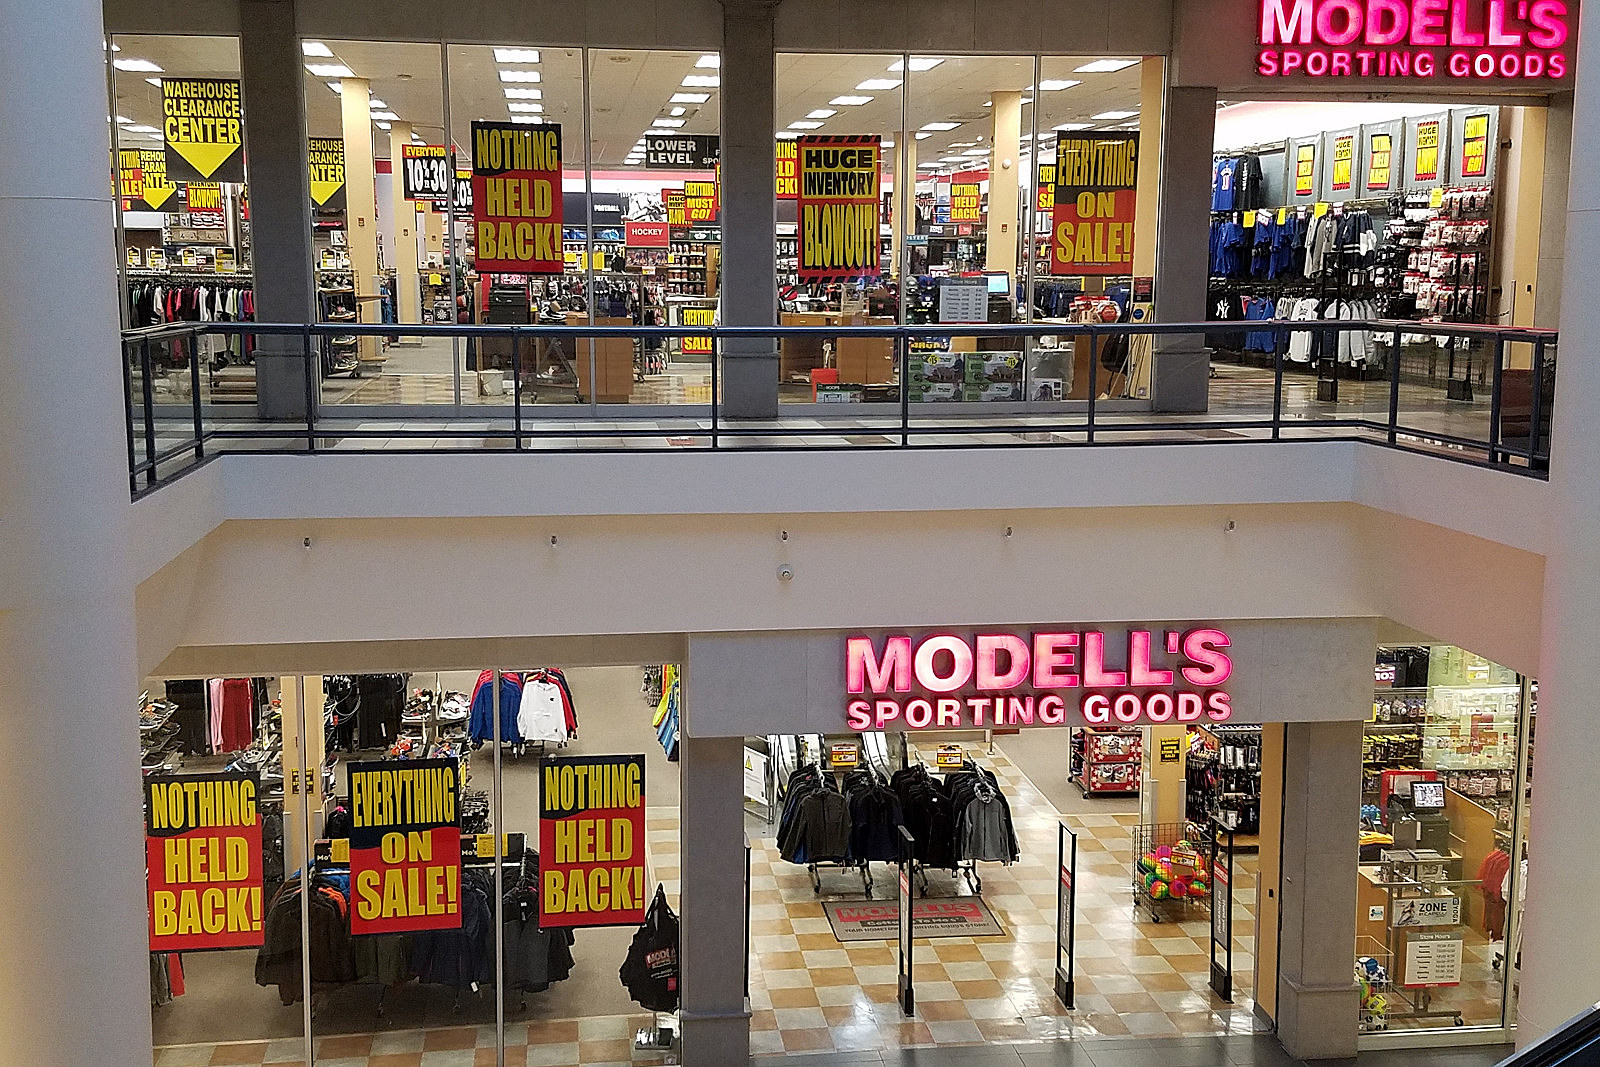 Modell's, filing for bankruptcy, will close all its stores